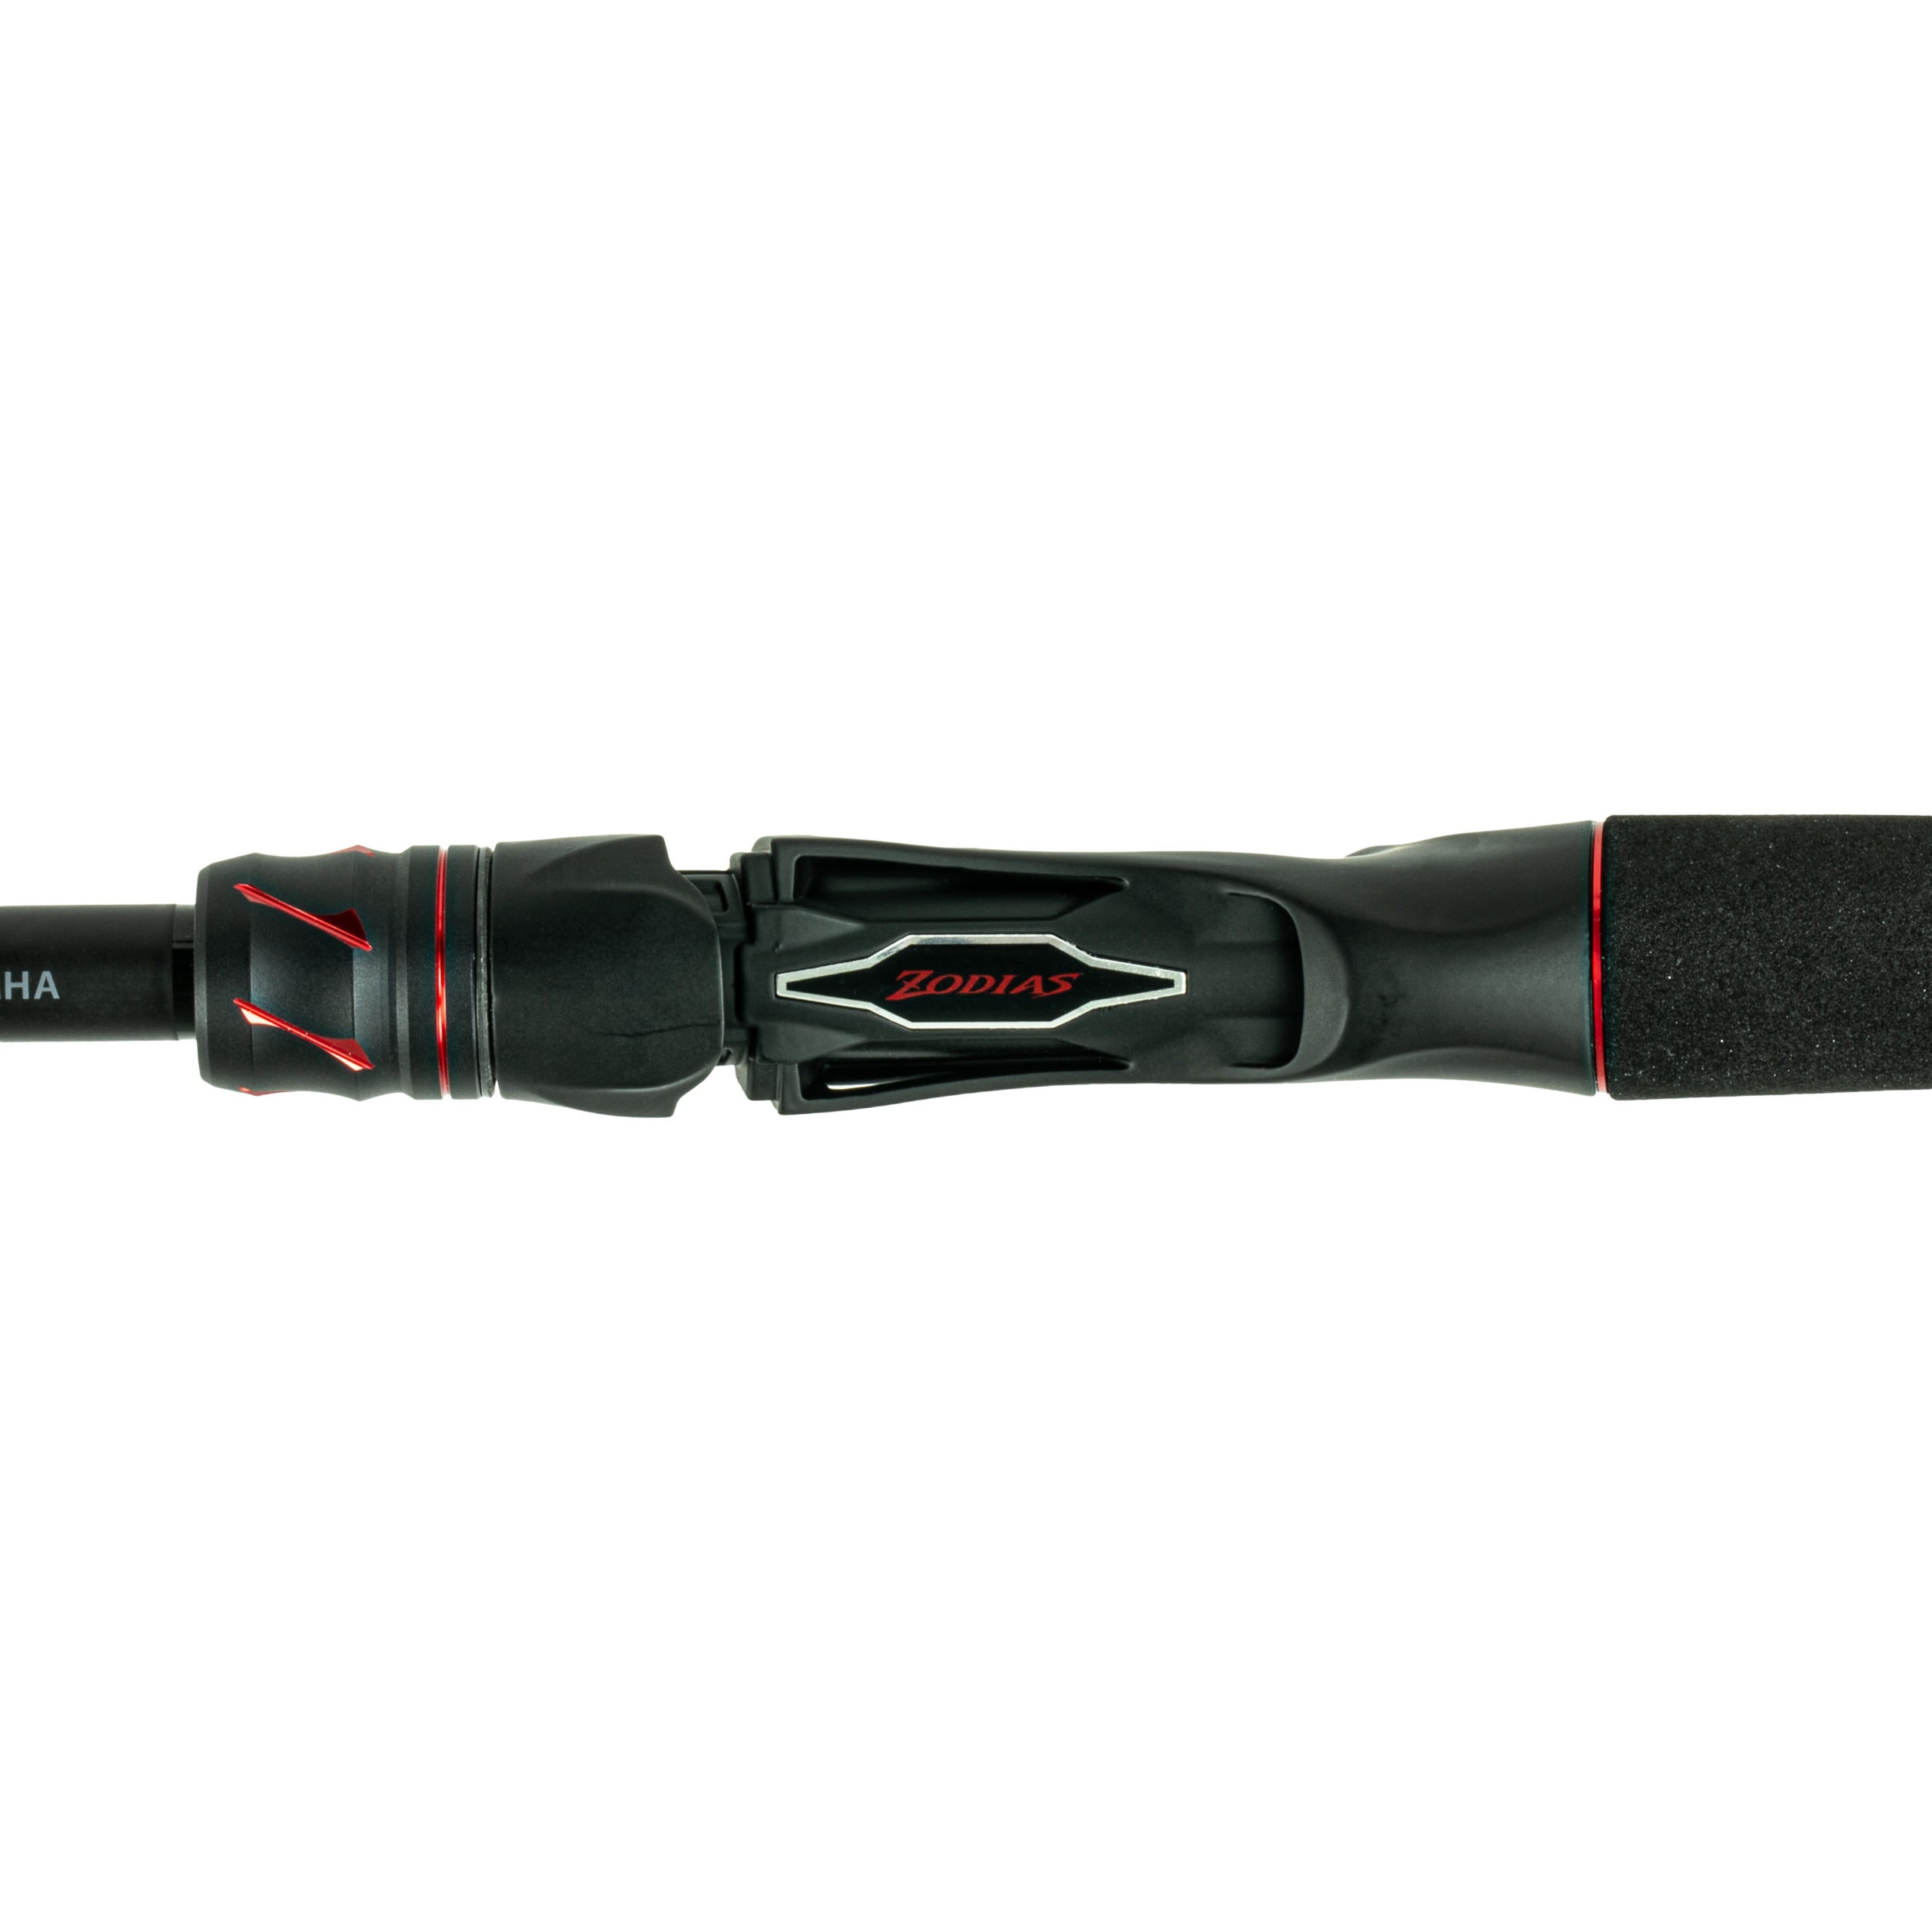 ICAST 2020: COMPLETE ZODIAS BASS ROD REDESIGN FROM SHIMANO